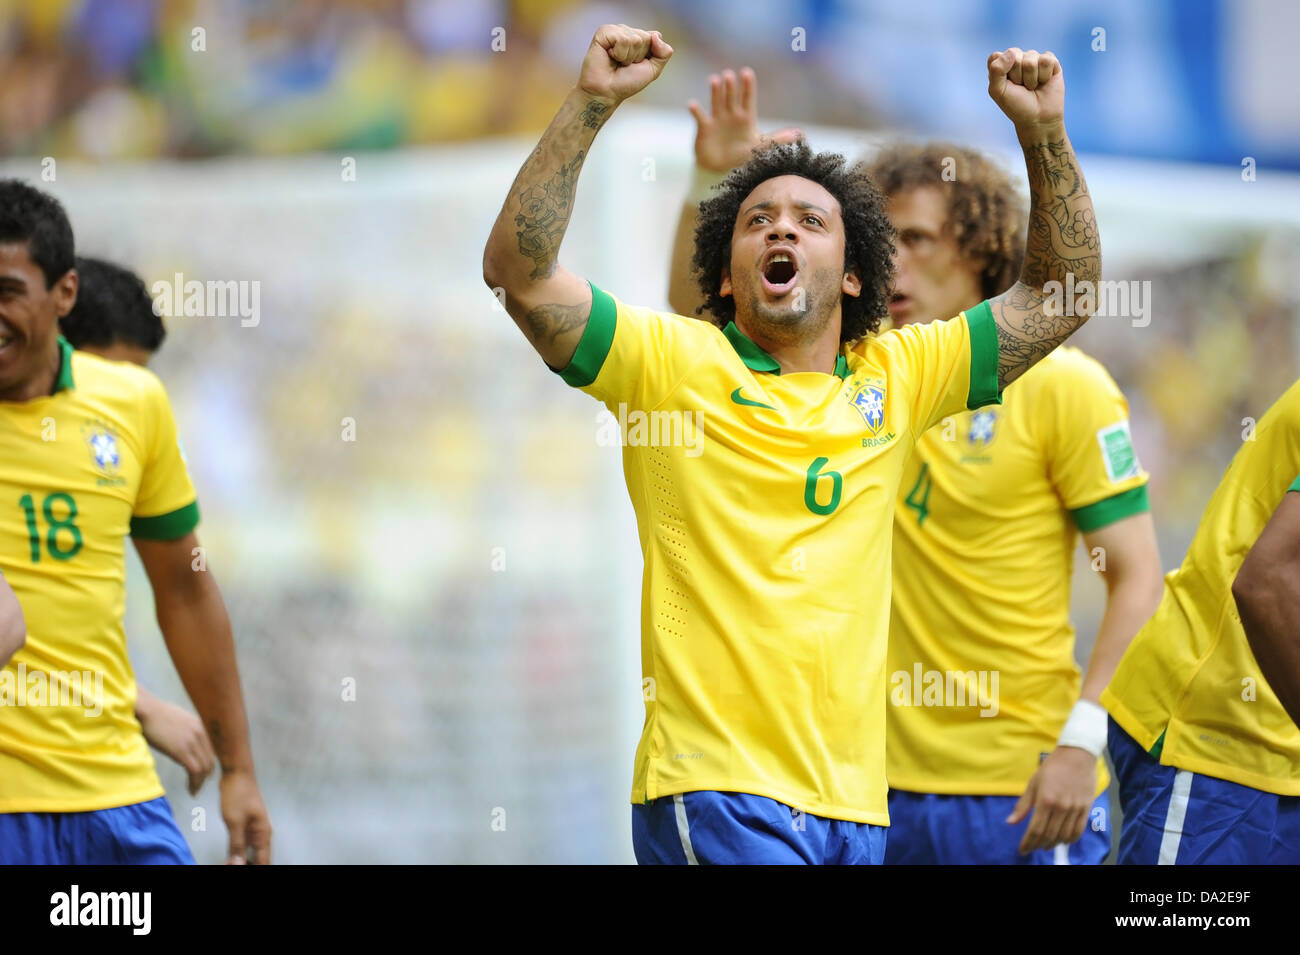 Marcelo (BRA), JUNE 15, 2013 - Football / Soccer : Marcelo of Brazil celebrates the opening goal during the FIFA Confederations Cup Brazil 2013 Group A match between Brazil 3-0 Japan at Estadio Nacional in Brasilia, Brazil. (Photo by Takahisa Hirano/AFLO) Stock Photo